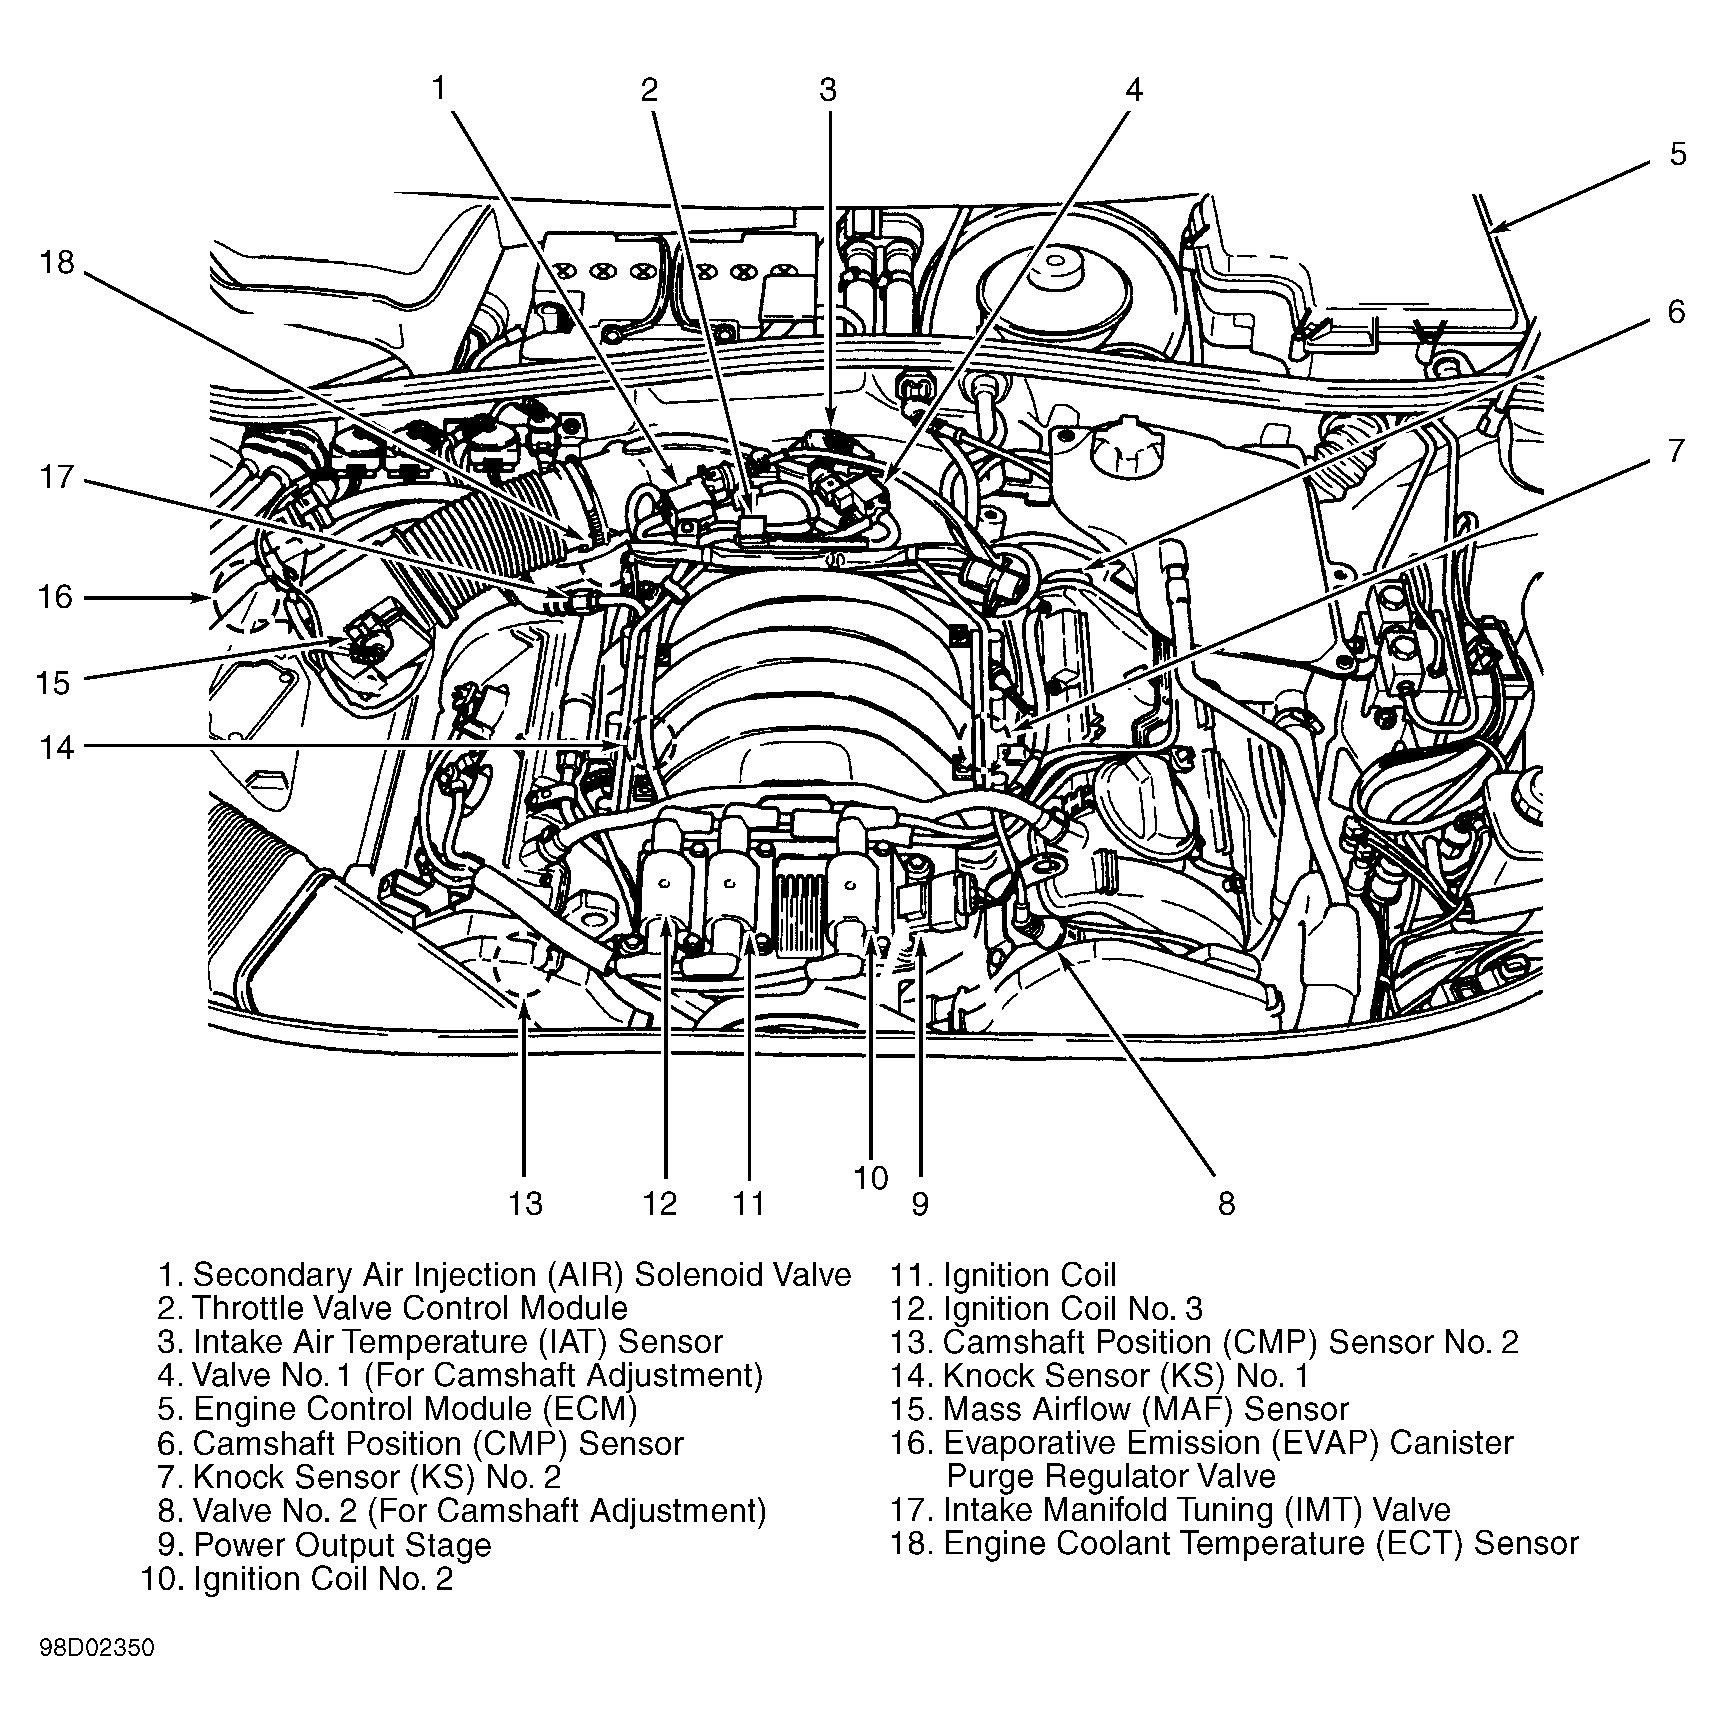 2010 Chevy Aveo Engine Diagram 2005 Dodge Charger Engine Diagram Wiring Diagram Schema Of 2010 Chevy Aveo Engine Diagram